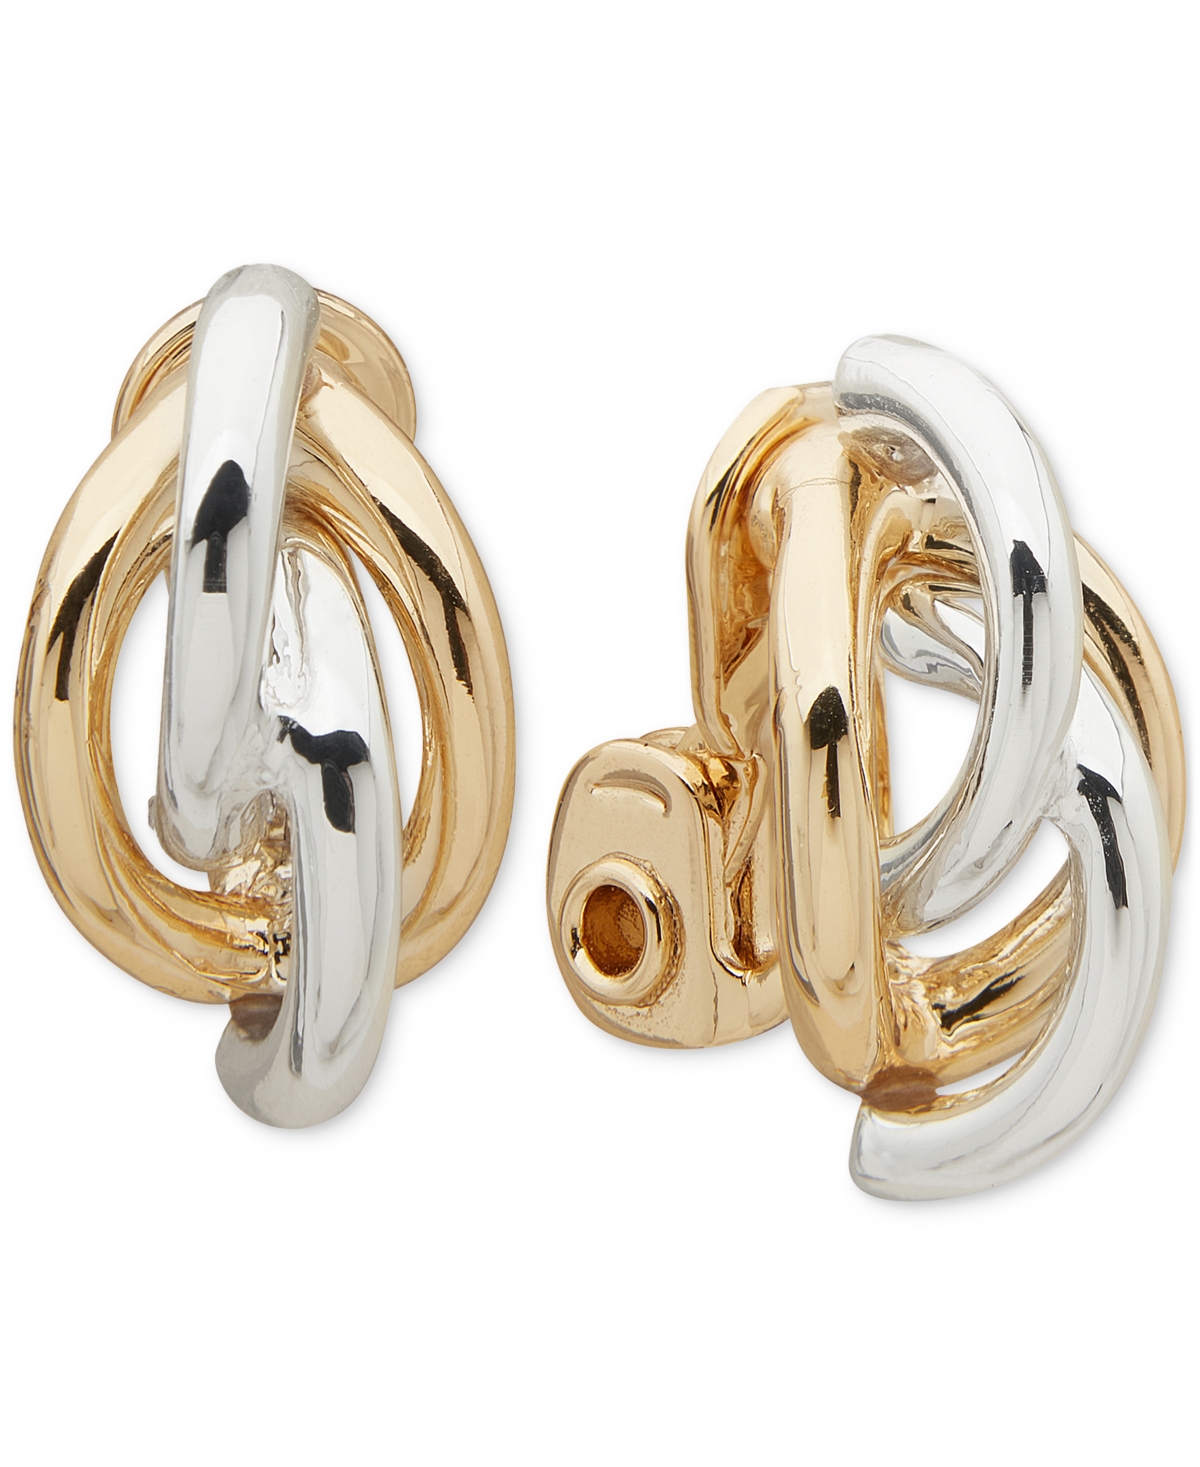 Two-Tone Twist Knot Clip-On Button Earrings - Gold/silve